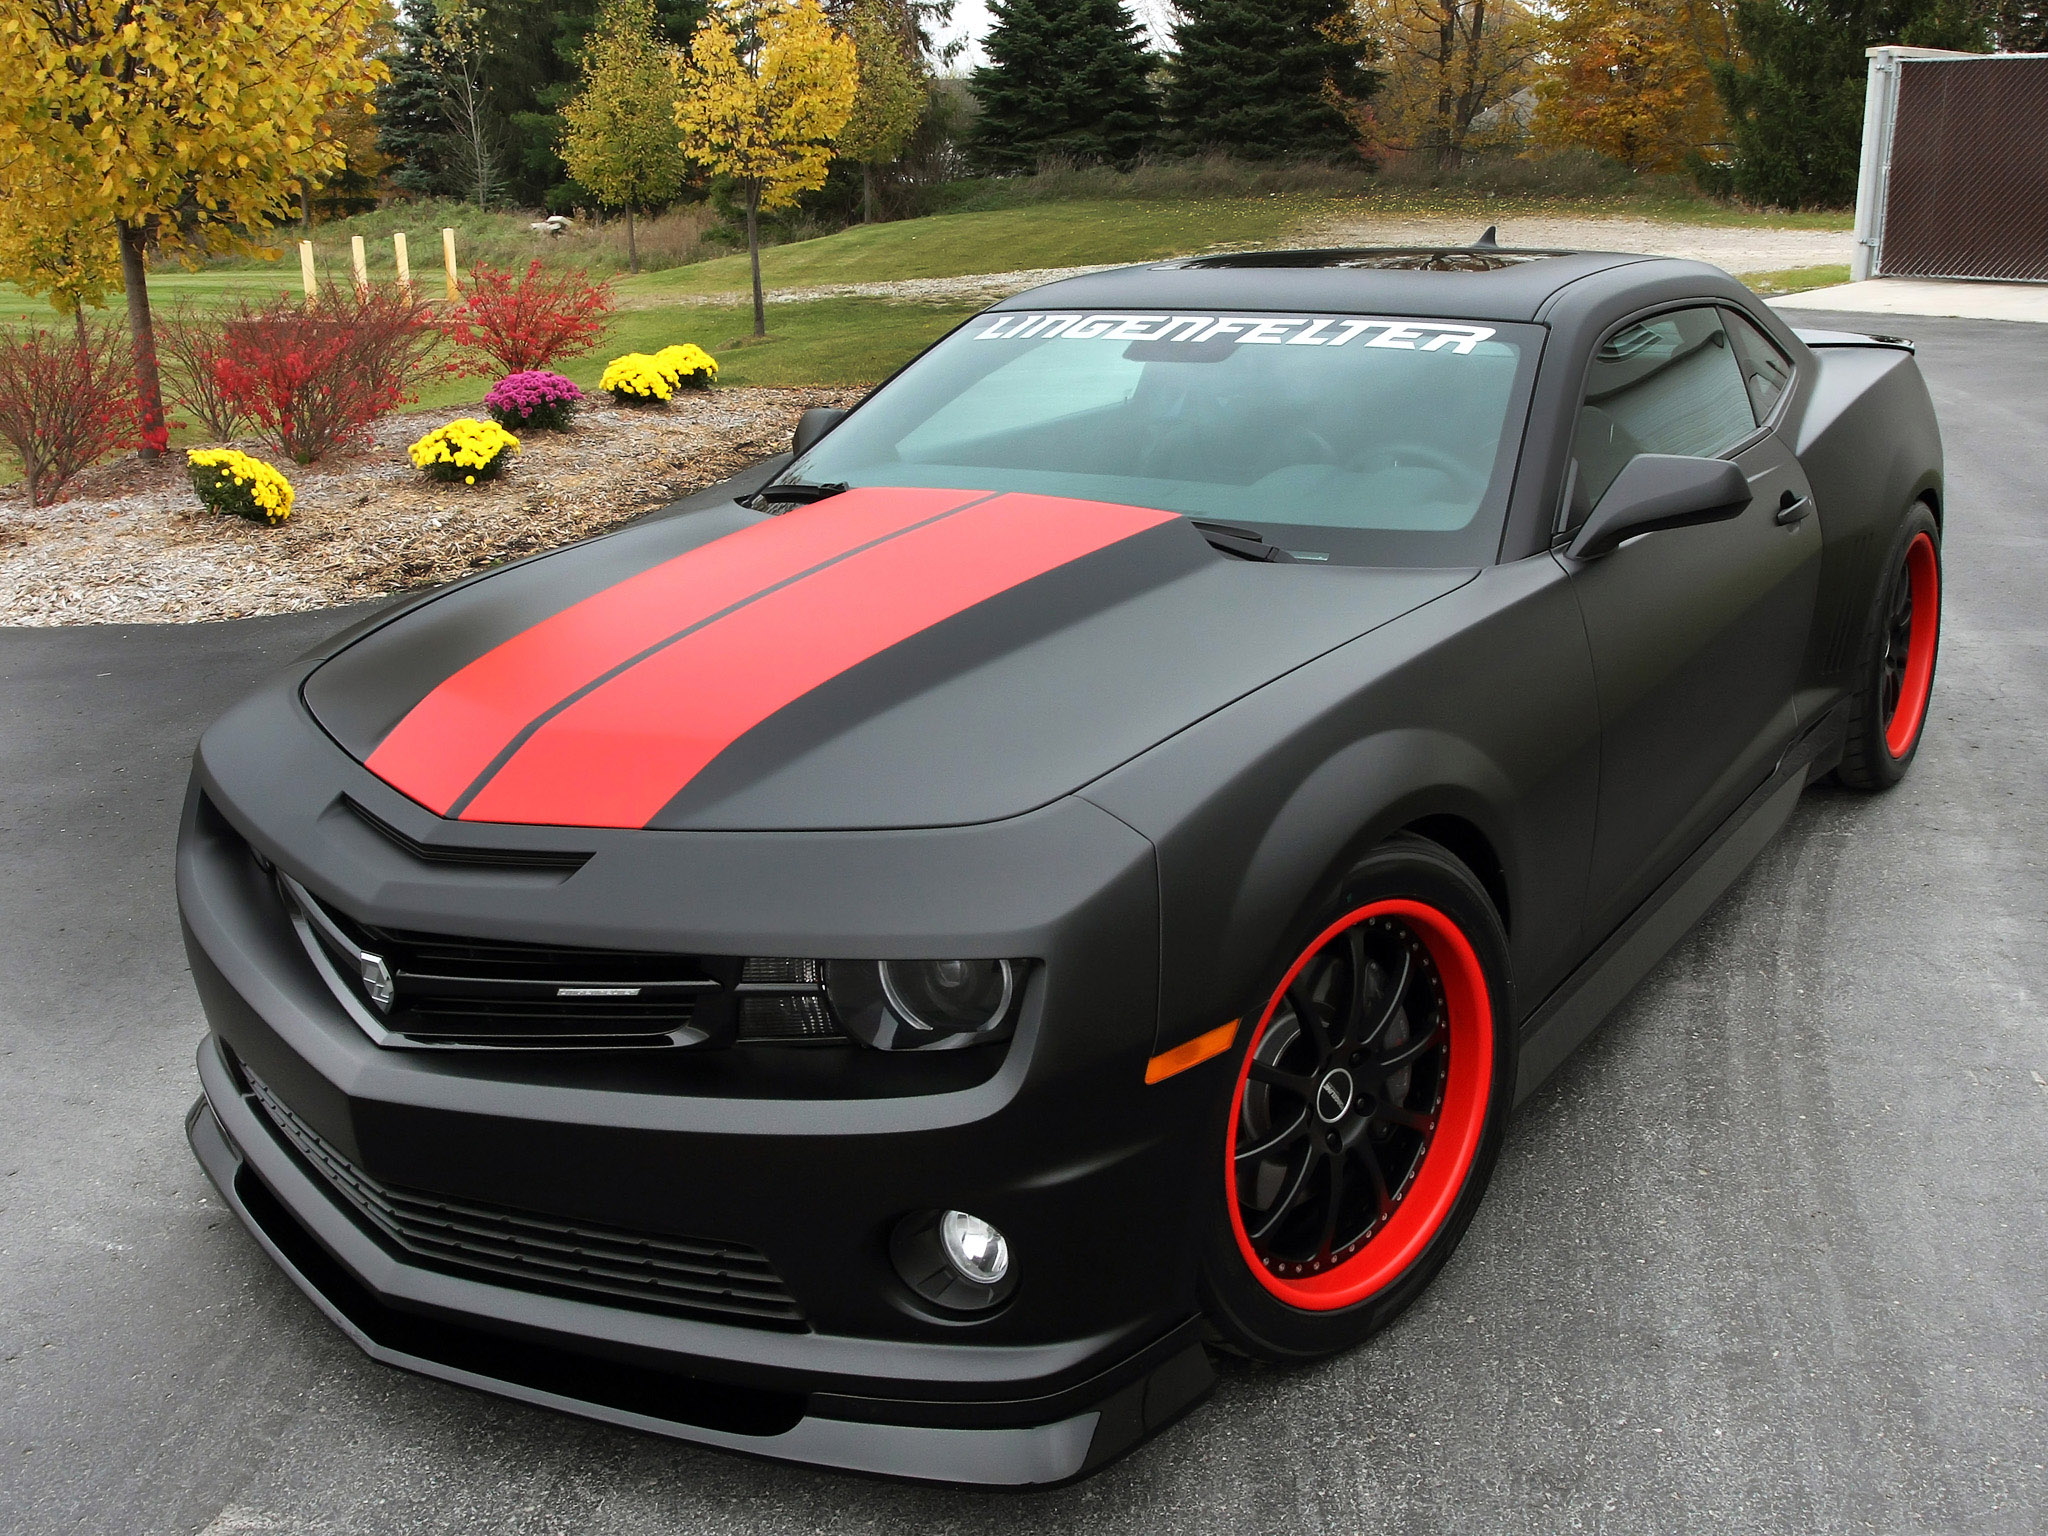 Amazing Lingenfelter Chevrolet Camaro Pictures & Backgrounds